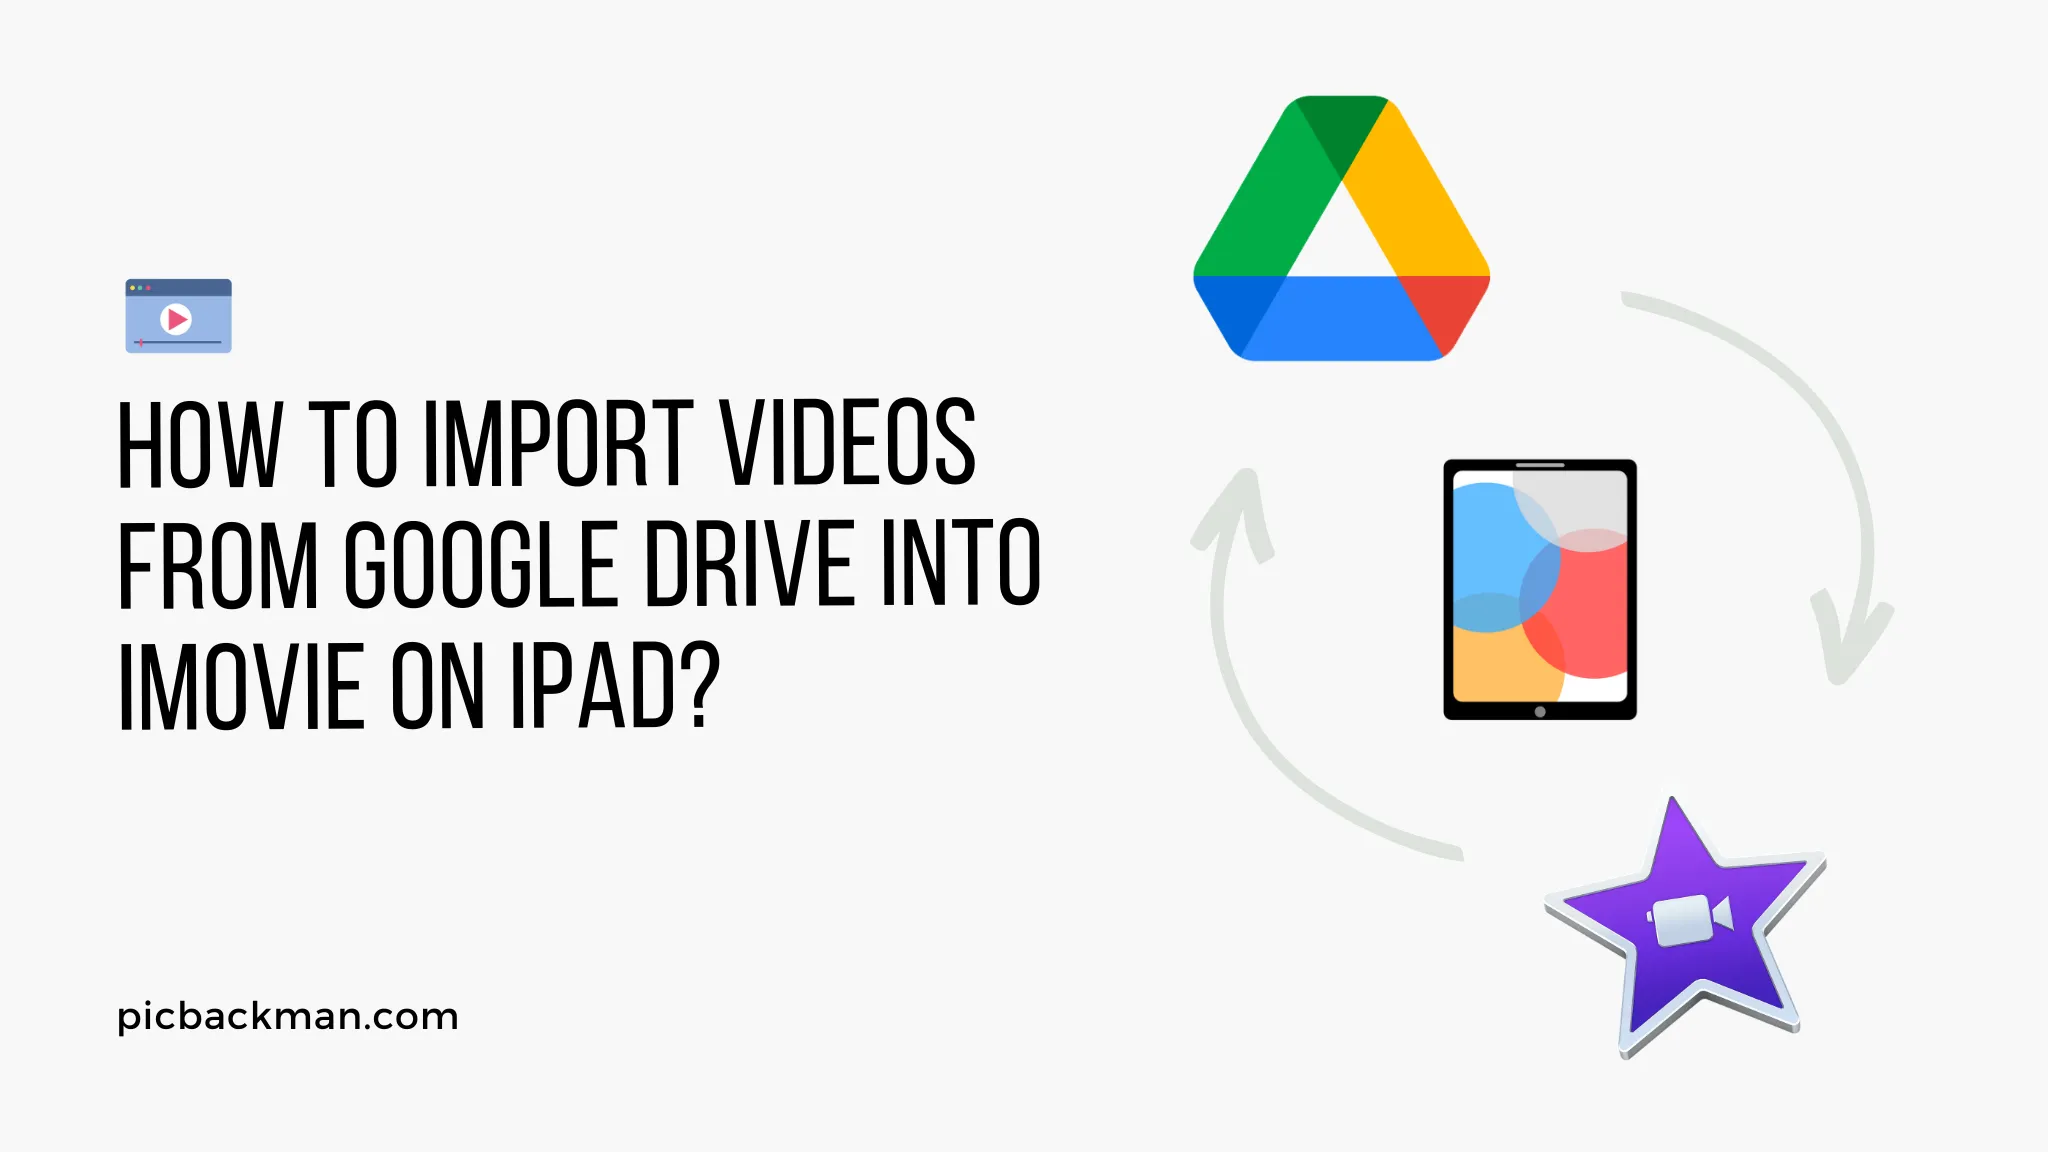 How to Import Videos from Google Drive into iMovie on iPad